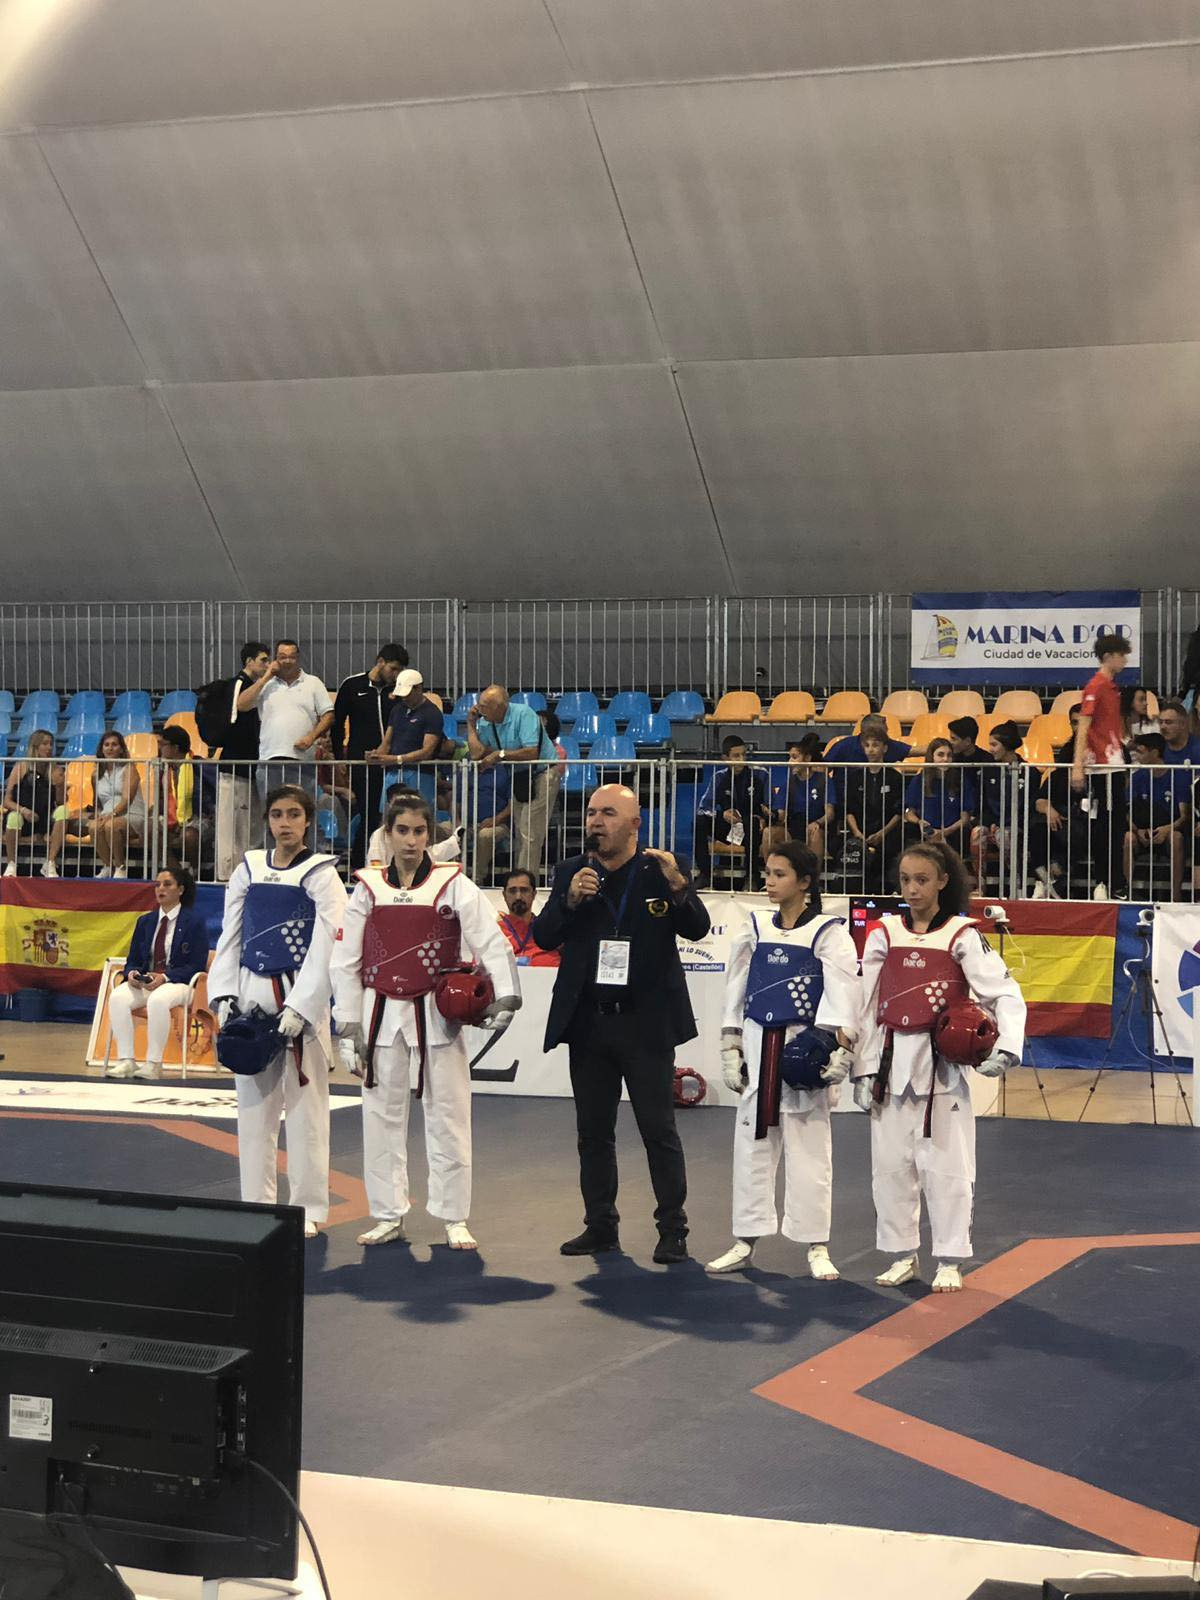 World Taekwondo Europe say they are acting to protect the health of young athletes ©WTE